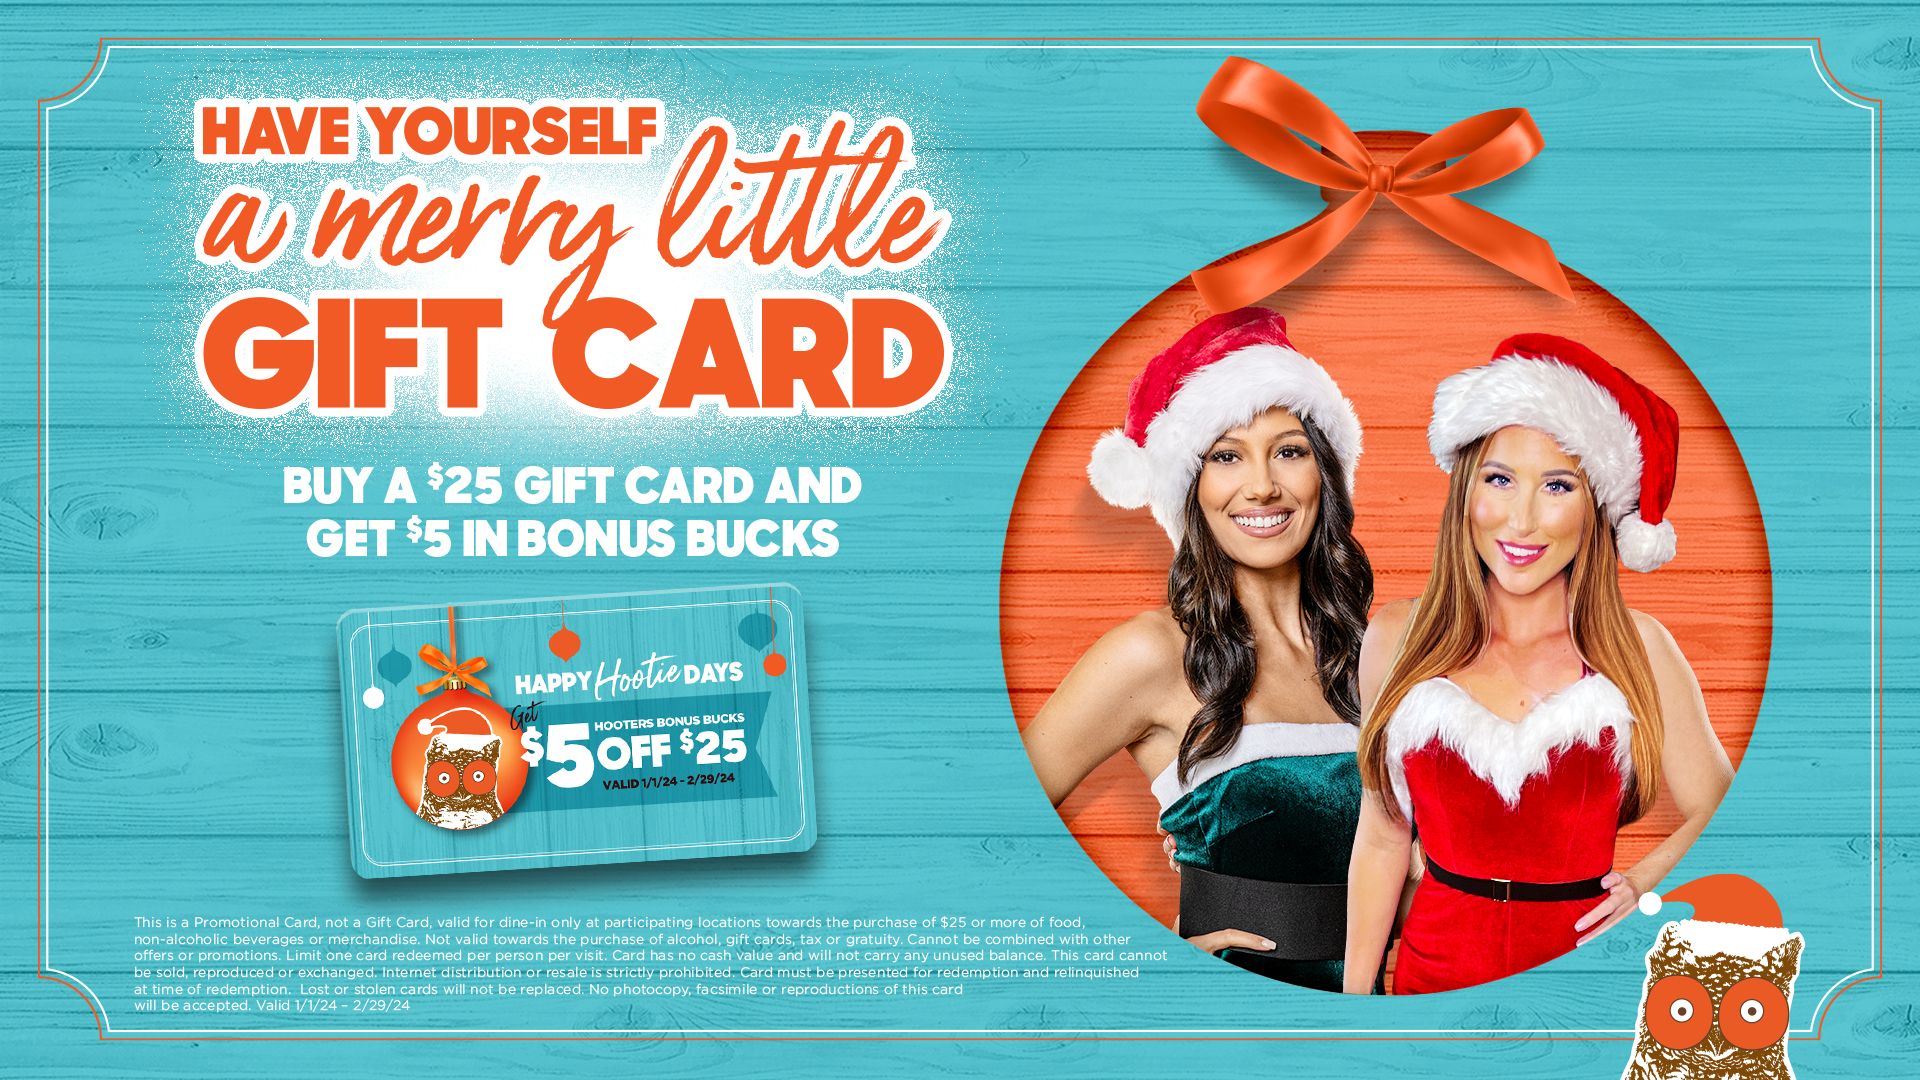 Have yourself a merry little gift card